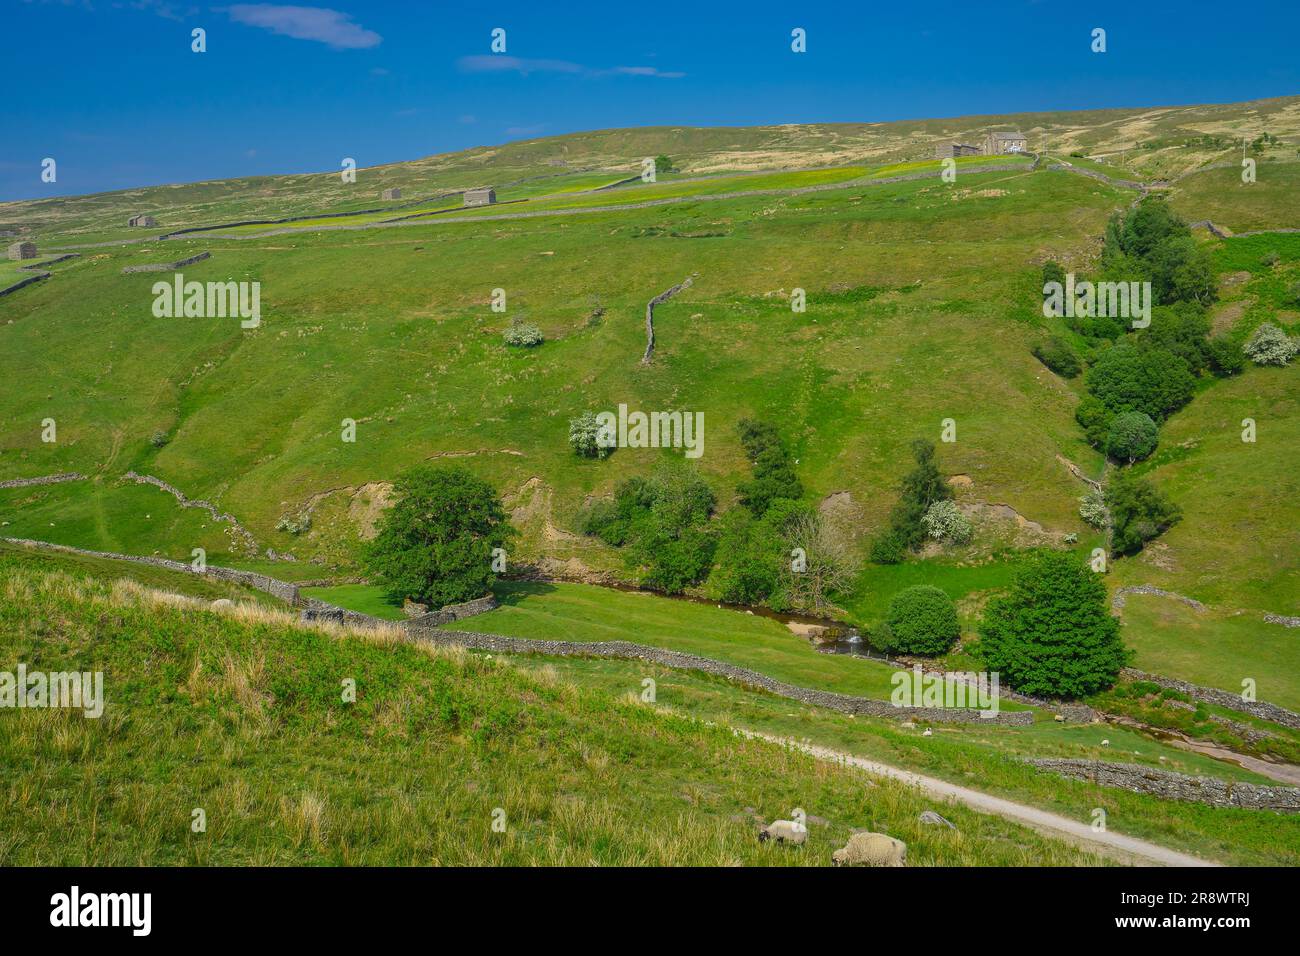 The steep sides of the valley of West Sotnesdale near Keld, Yorkshire Dales National Park. Stock Photo